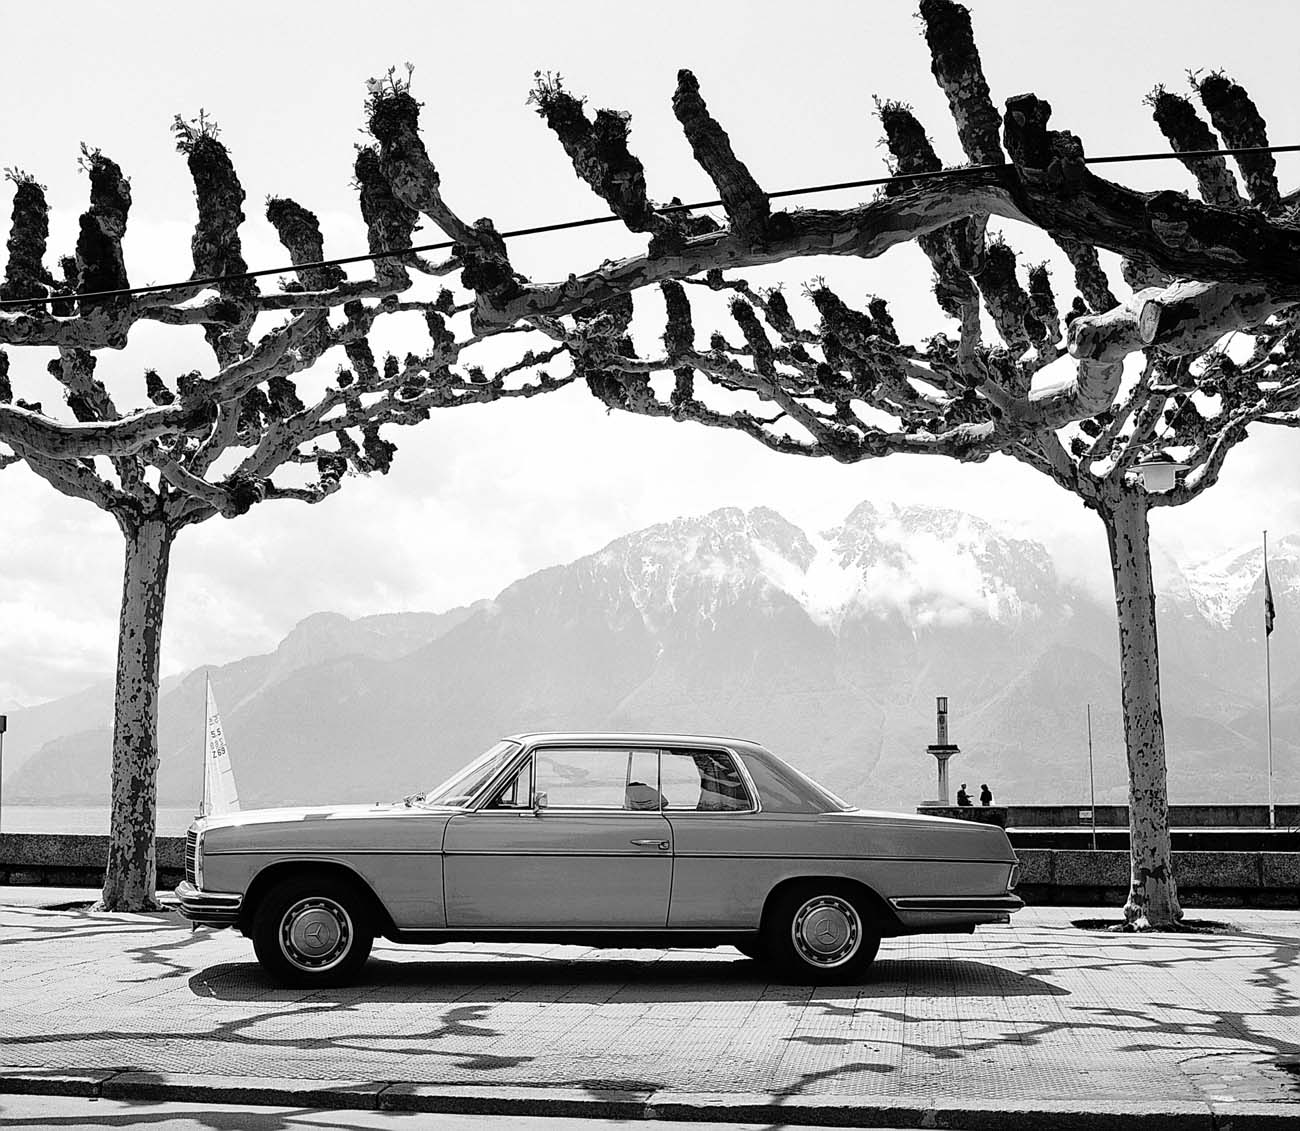 Premiere of the "Stroke Eight" coupés in 1968: The history of Mercedes-Benz E-Class coupés begins 50 years ago.